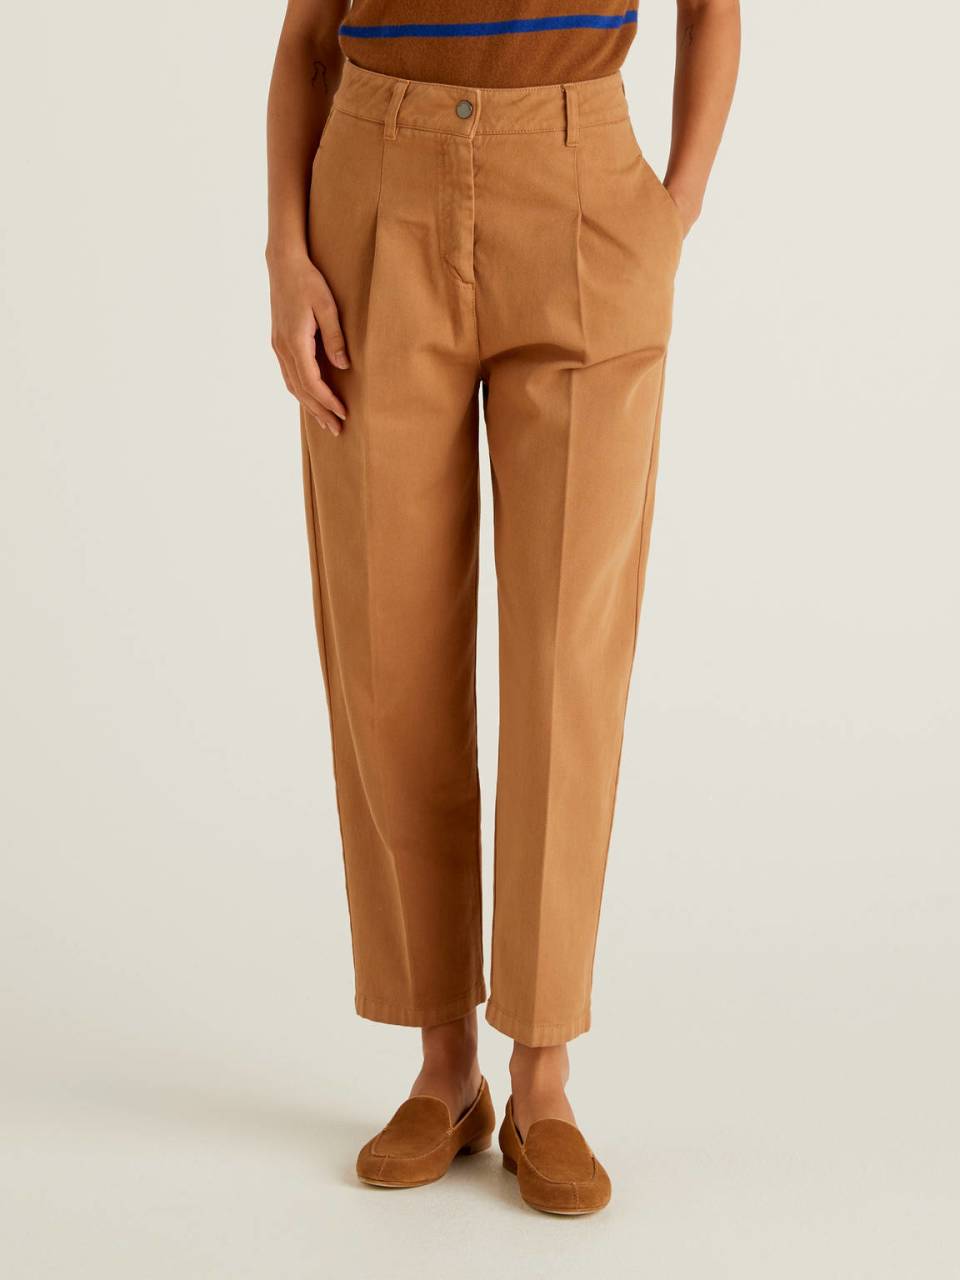 Benetton Slouchy trousers in 100% cotton. 1